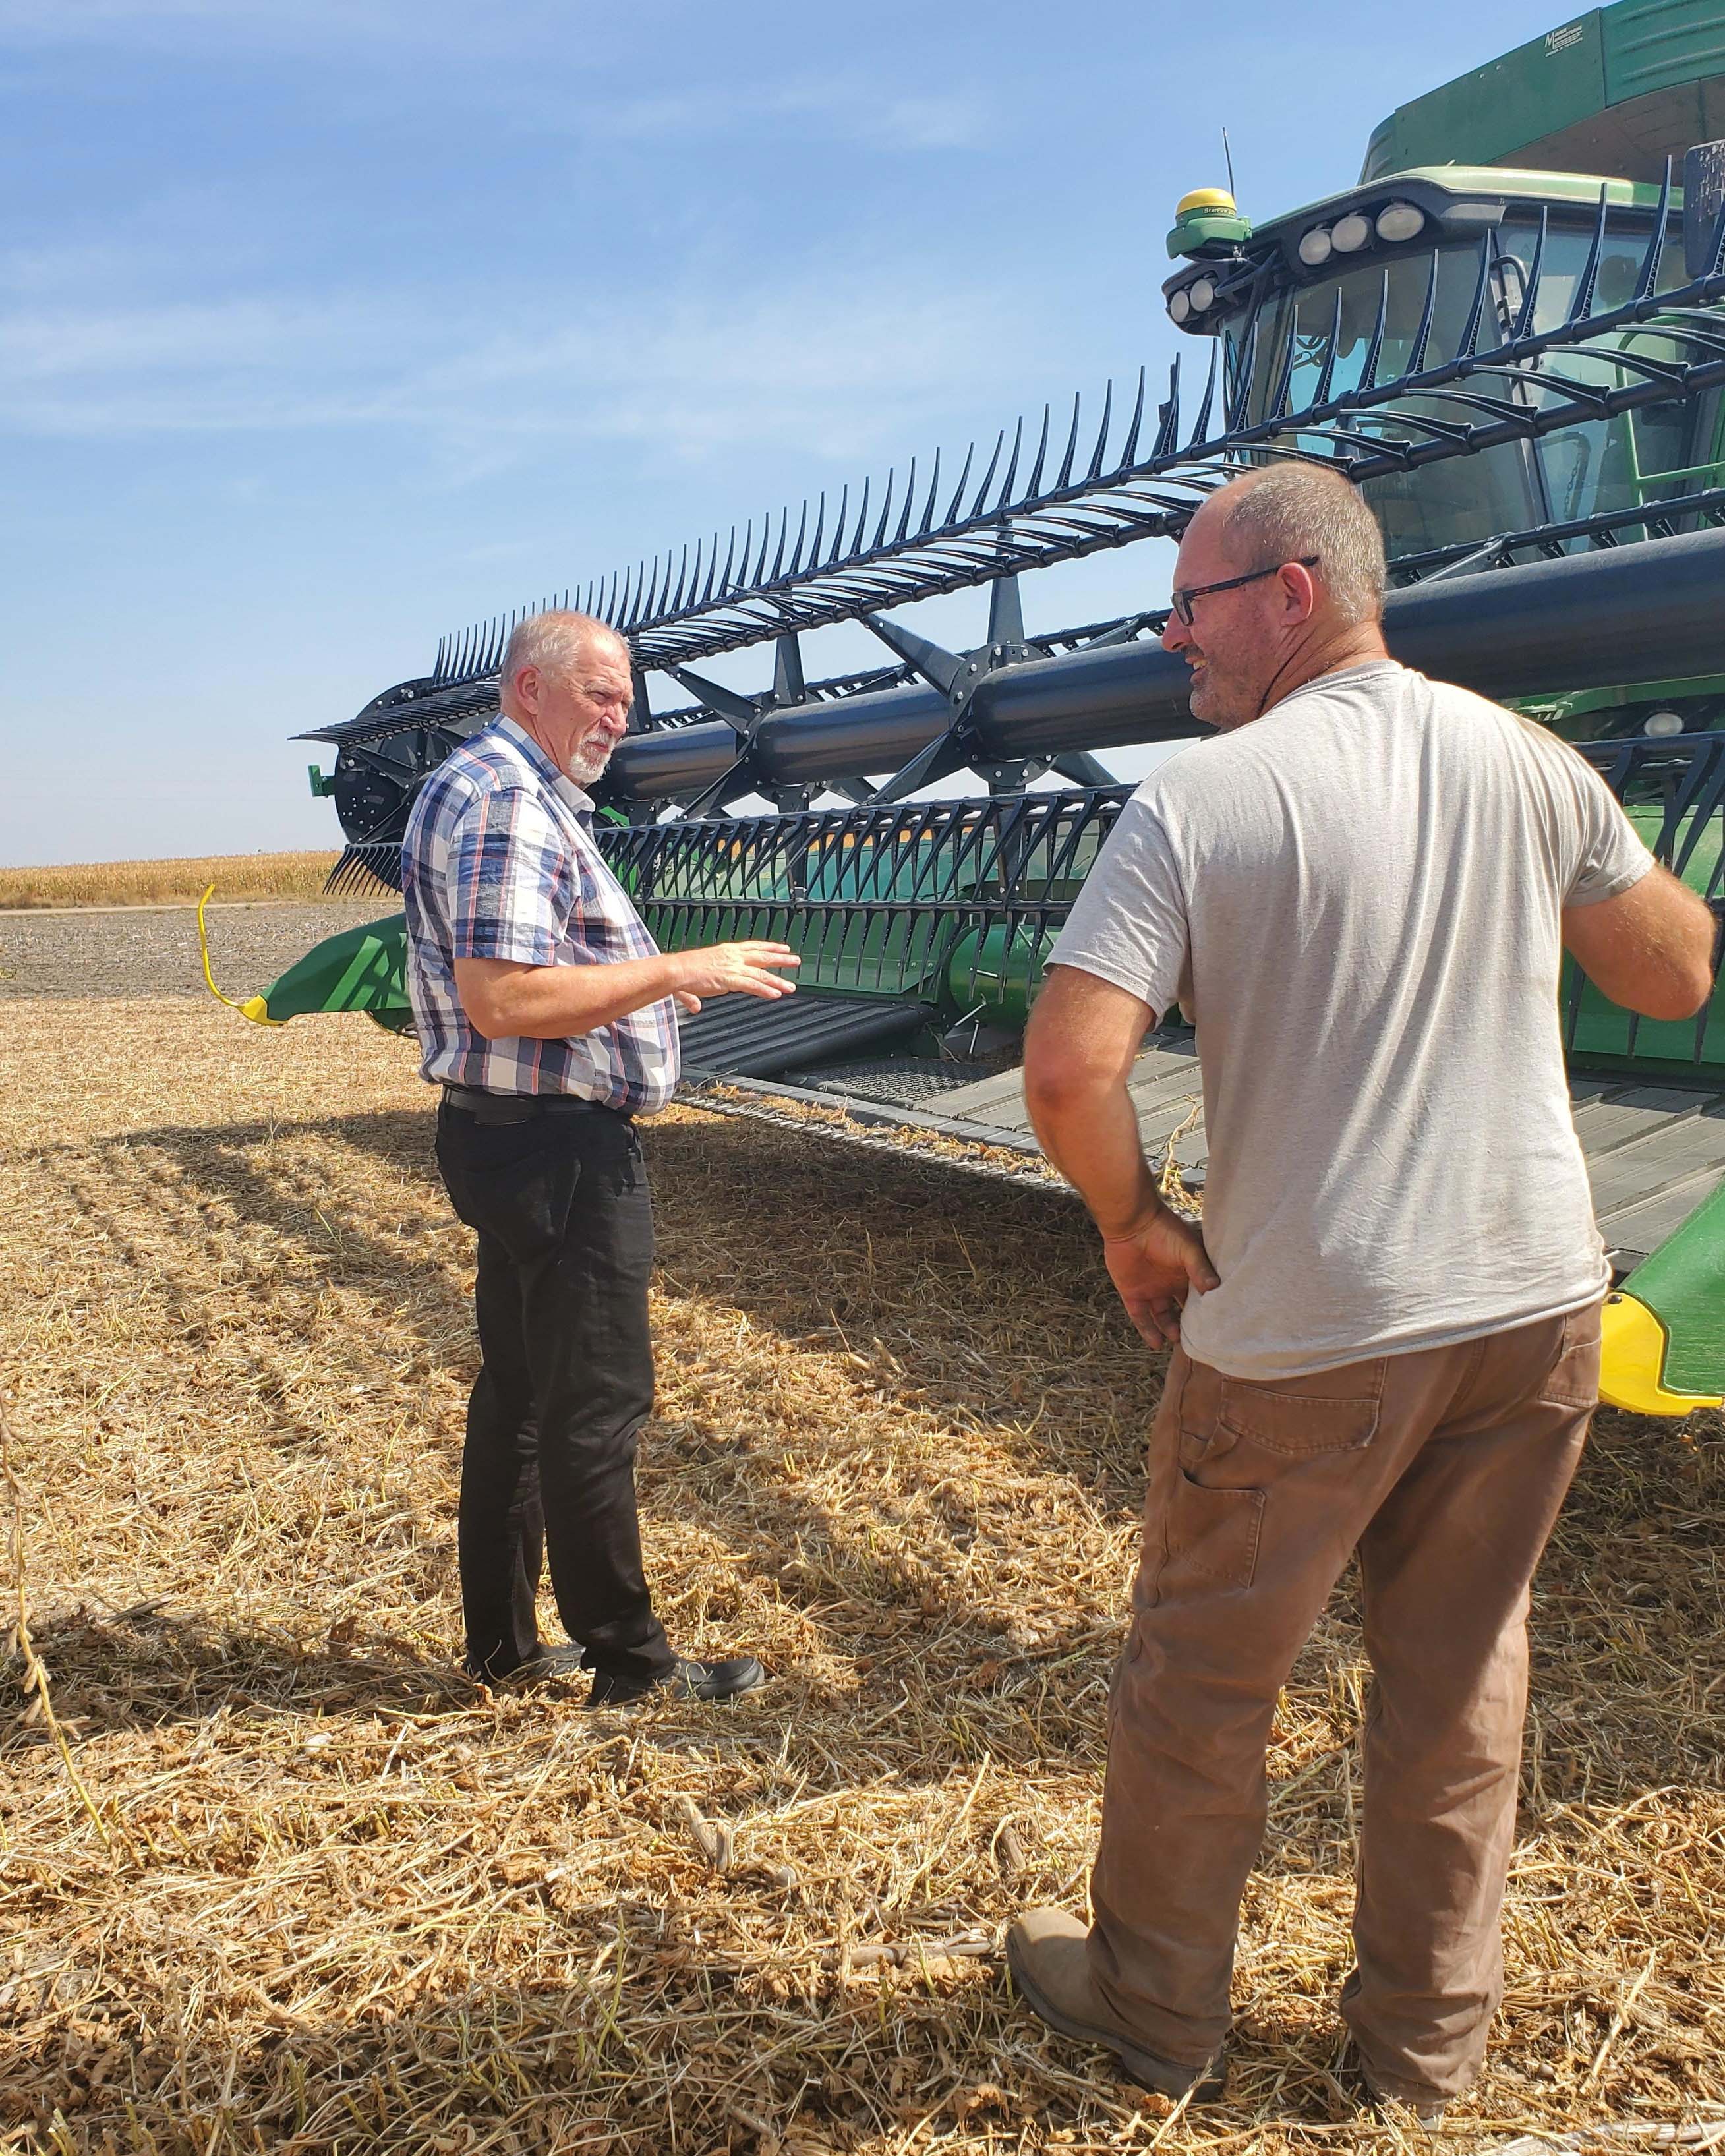 NCTA Dean Larry Gossen checks out harvest machinery with Kirk McConville of Indianola. (Photo by J. McConville / NCTA)